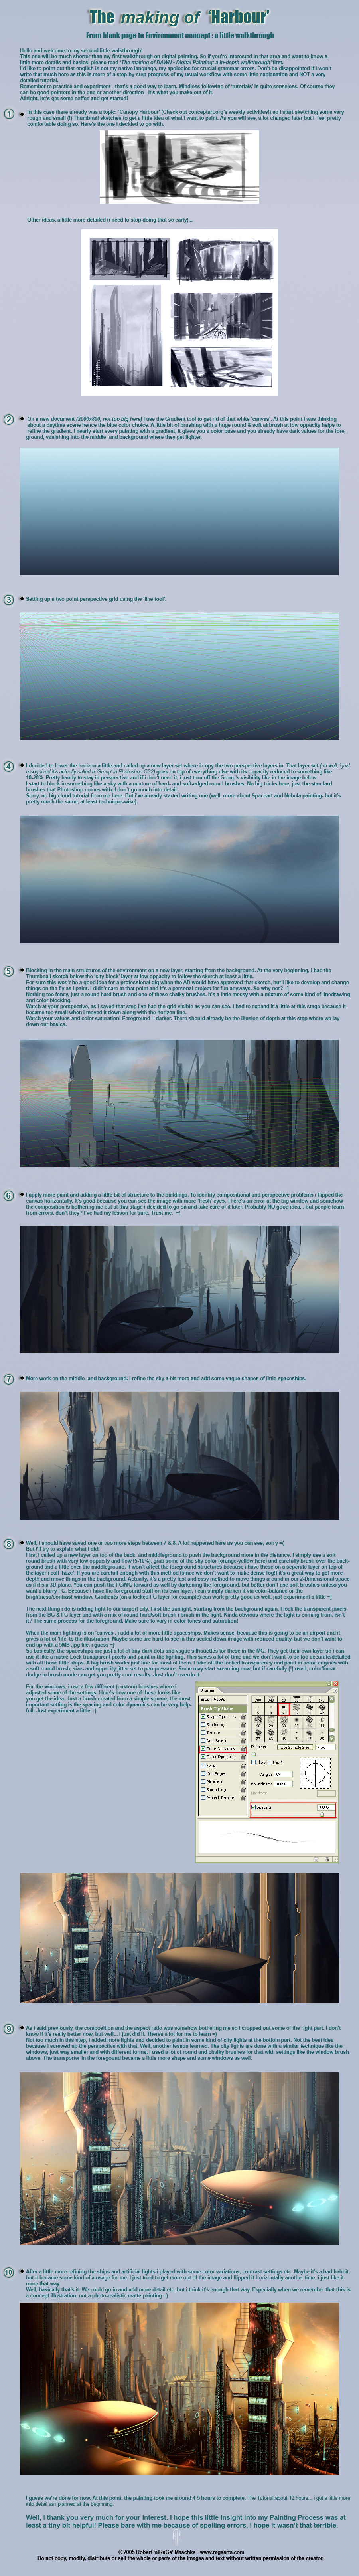 Inside Environment Painting 2